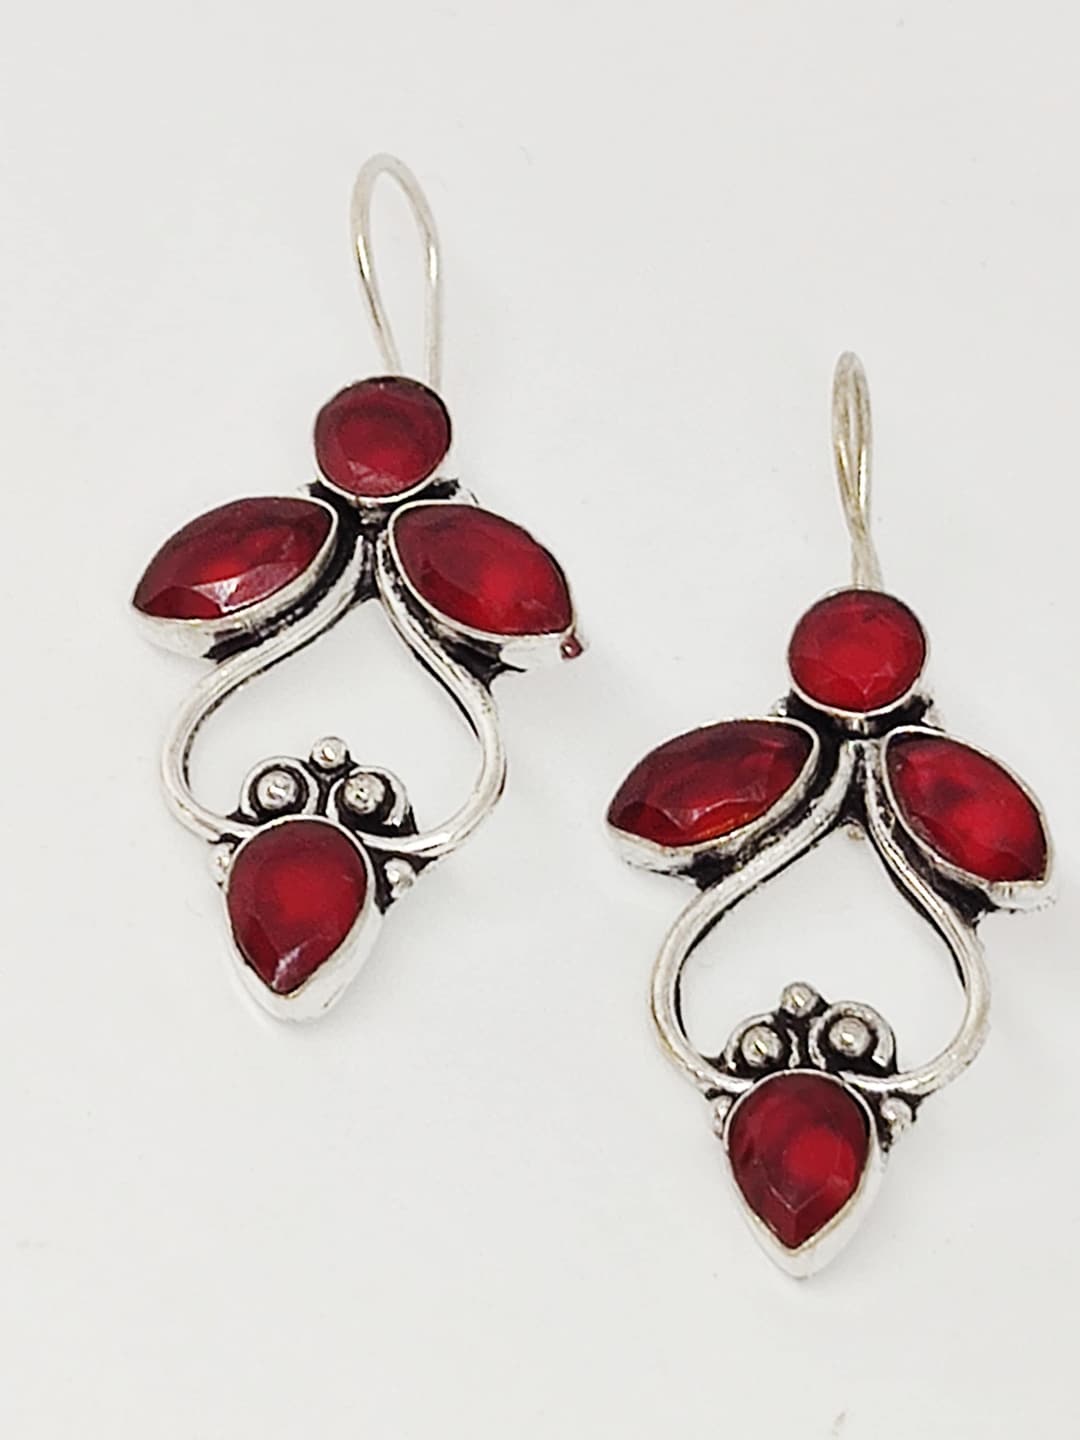 EL REGALO Red Contemporary Drop Earrings - for Women and Girls
Style ID: 16770290